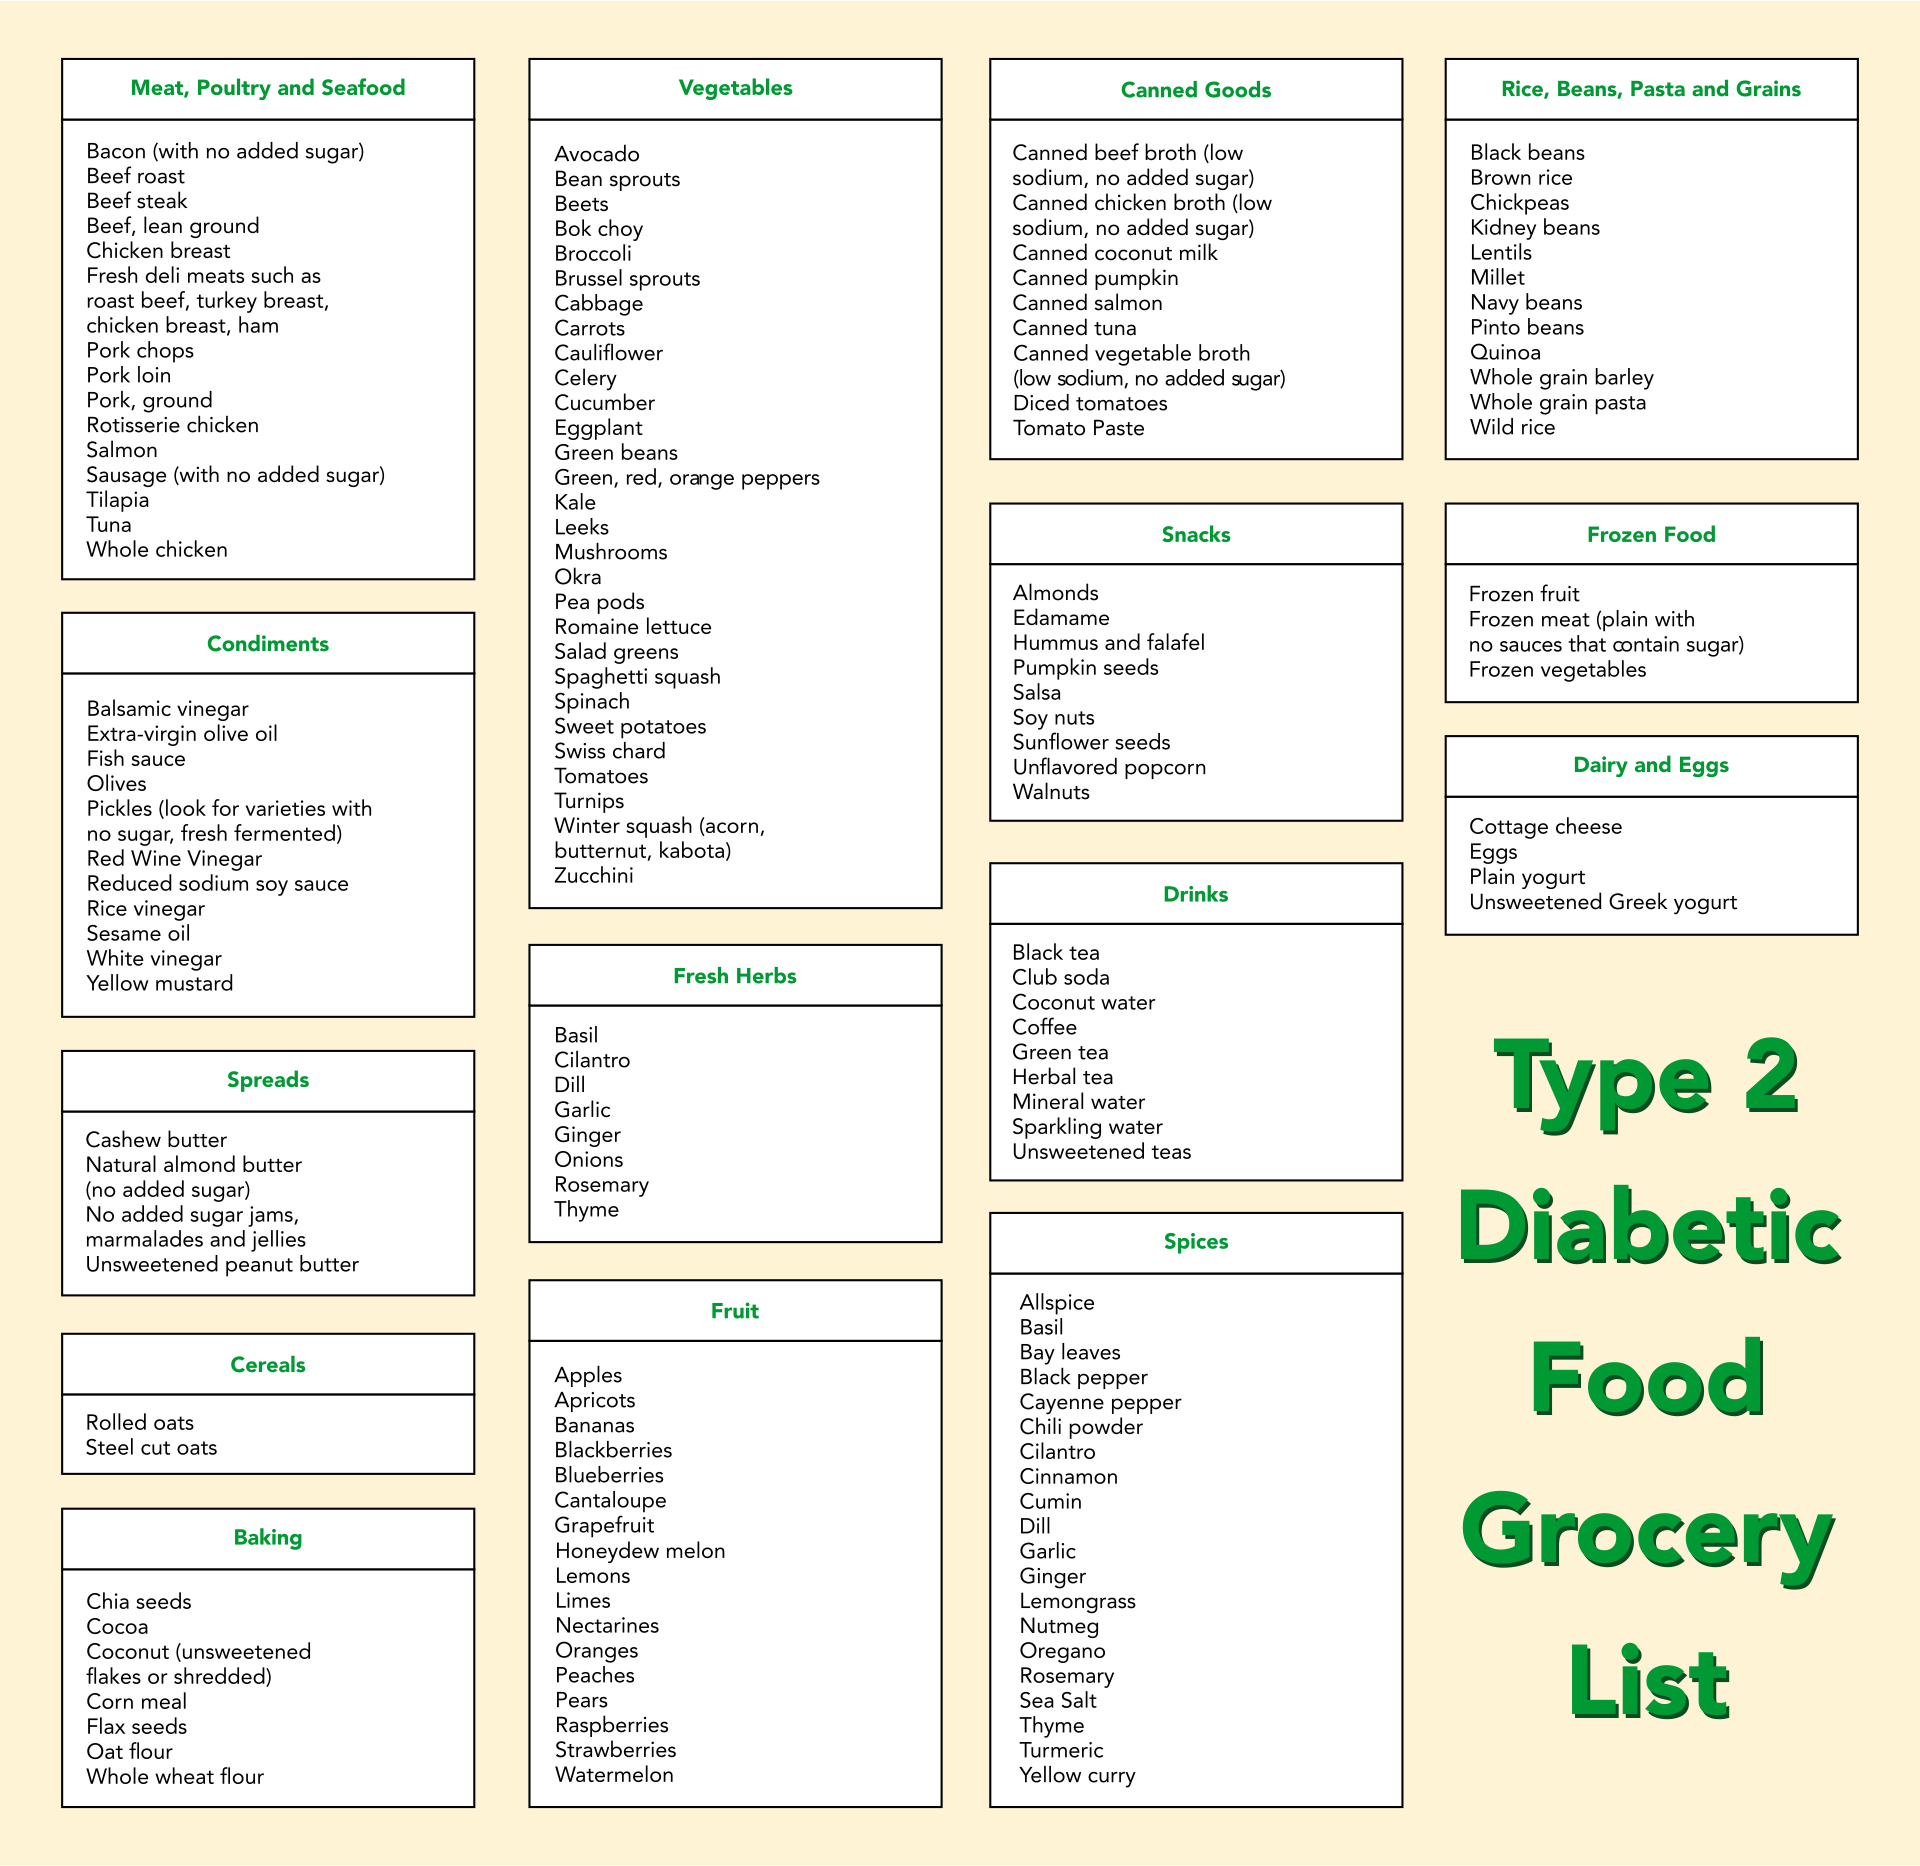 Printable Diabetic Food Chart With Portion Sizes - Free Printable Download